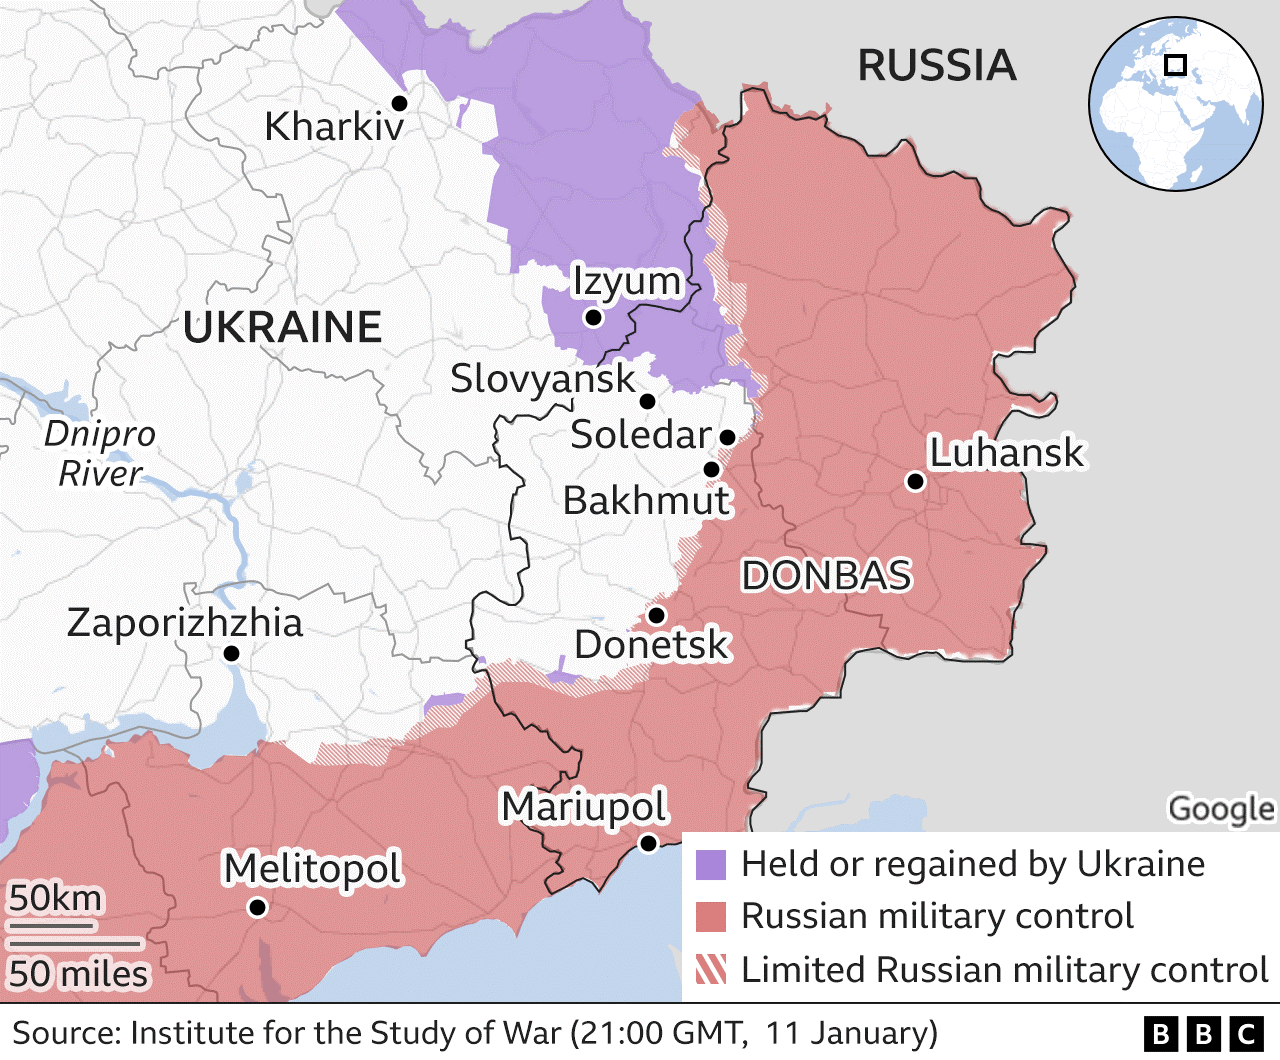 Map shows areas of control in the Donetsk region of eastern Ukraine